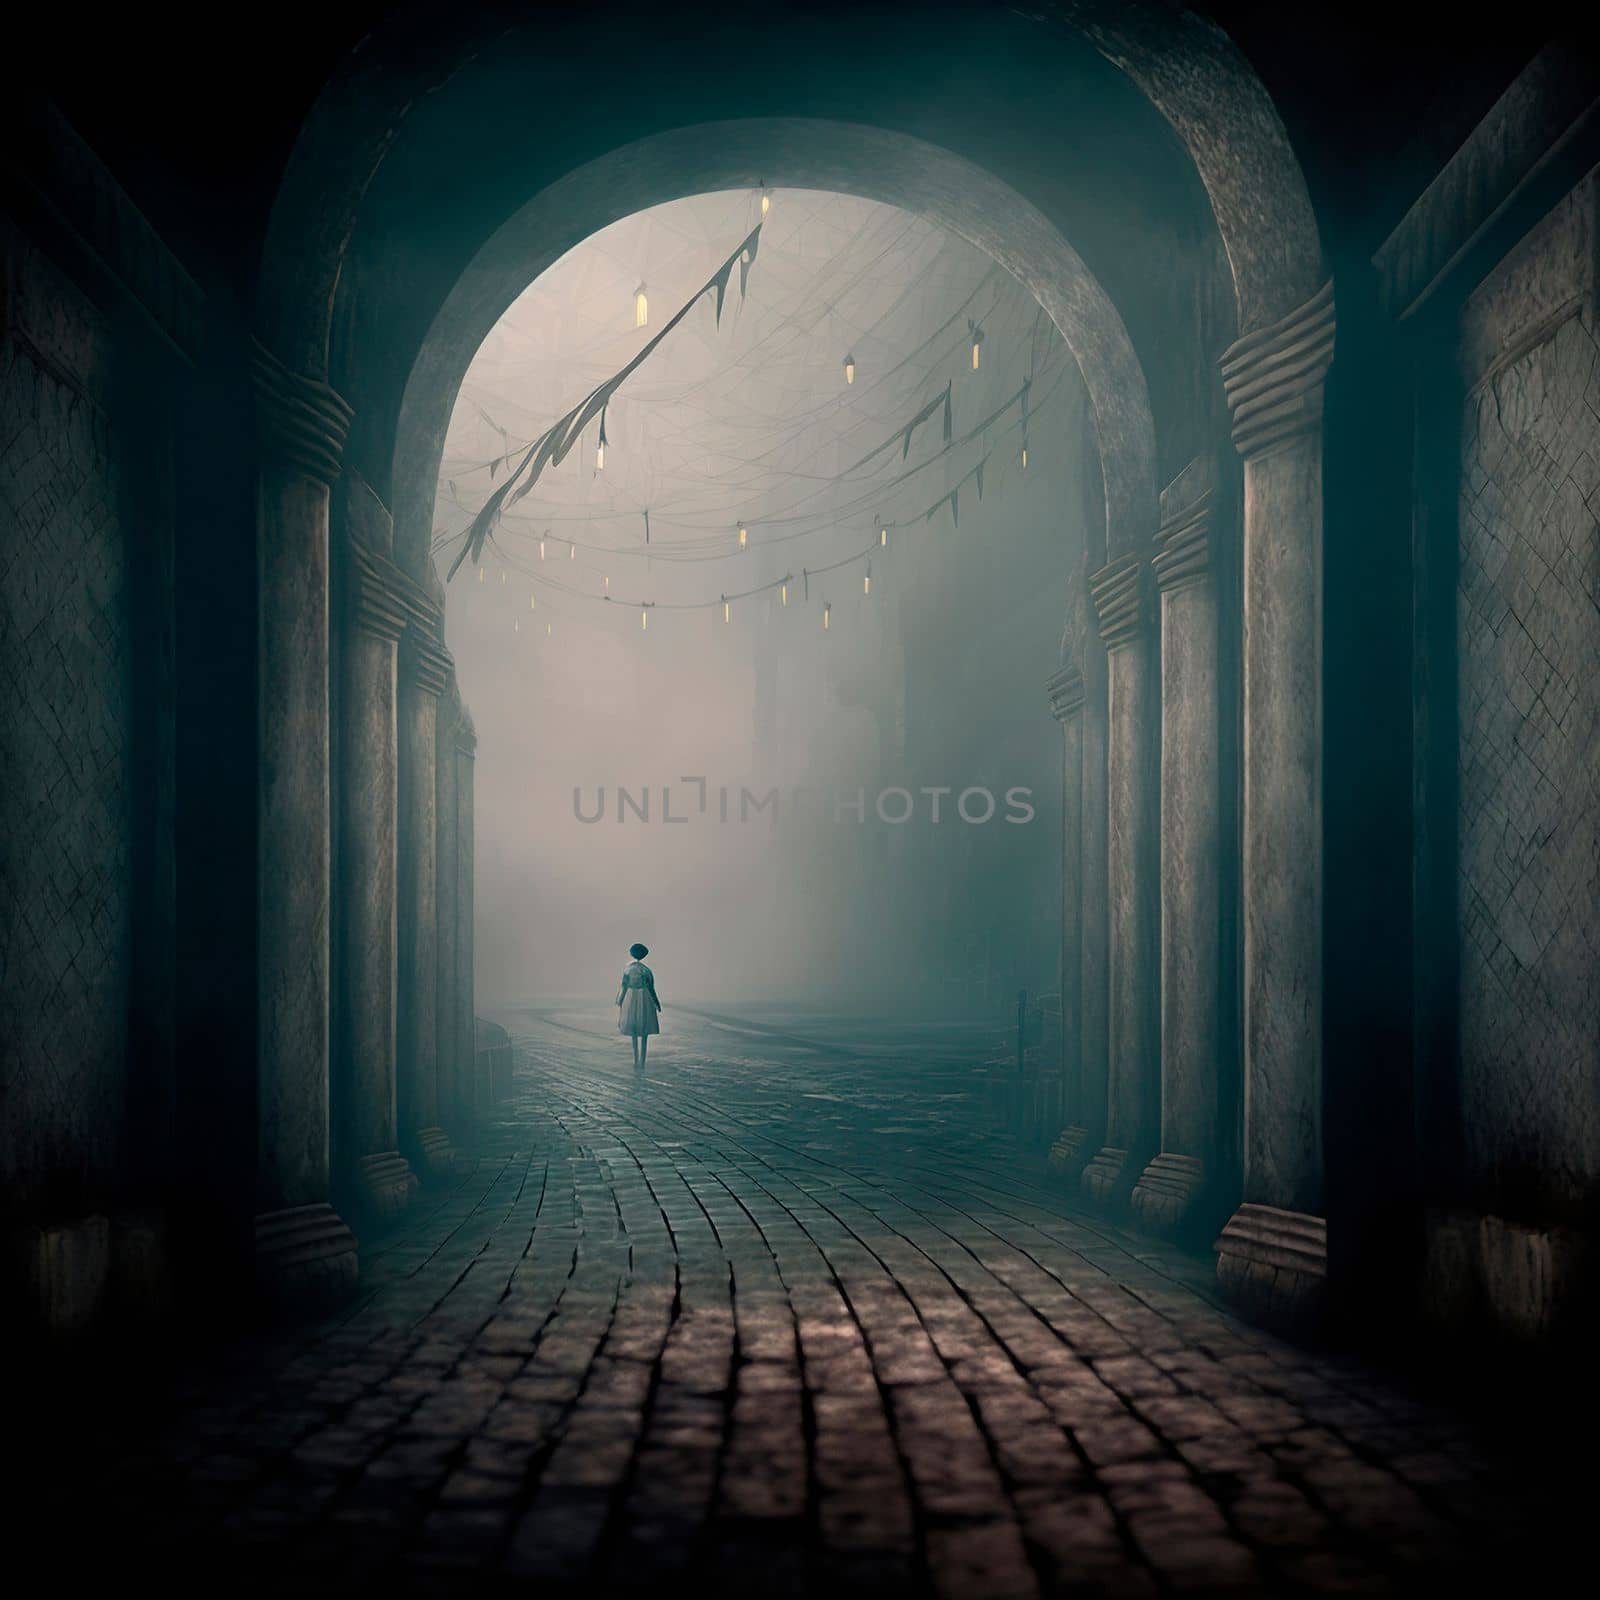 The lonely figure of a girl in a gloomy city. High quality illustration